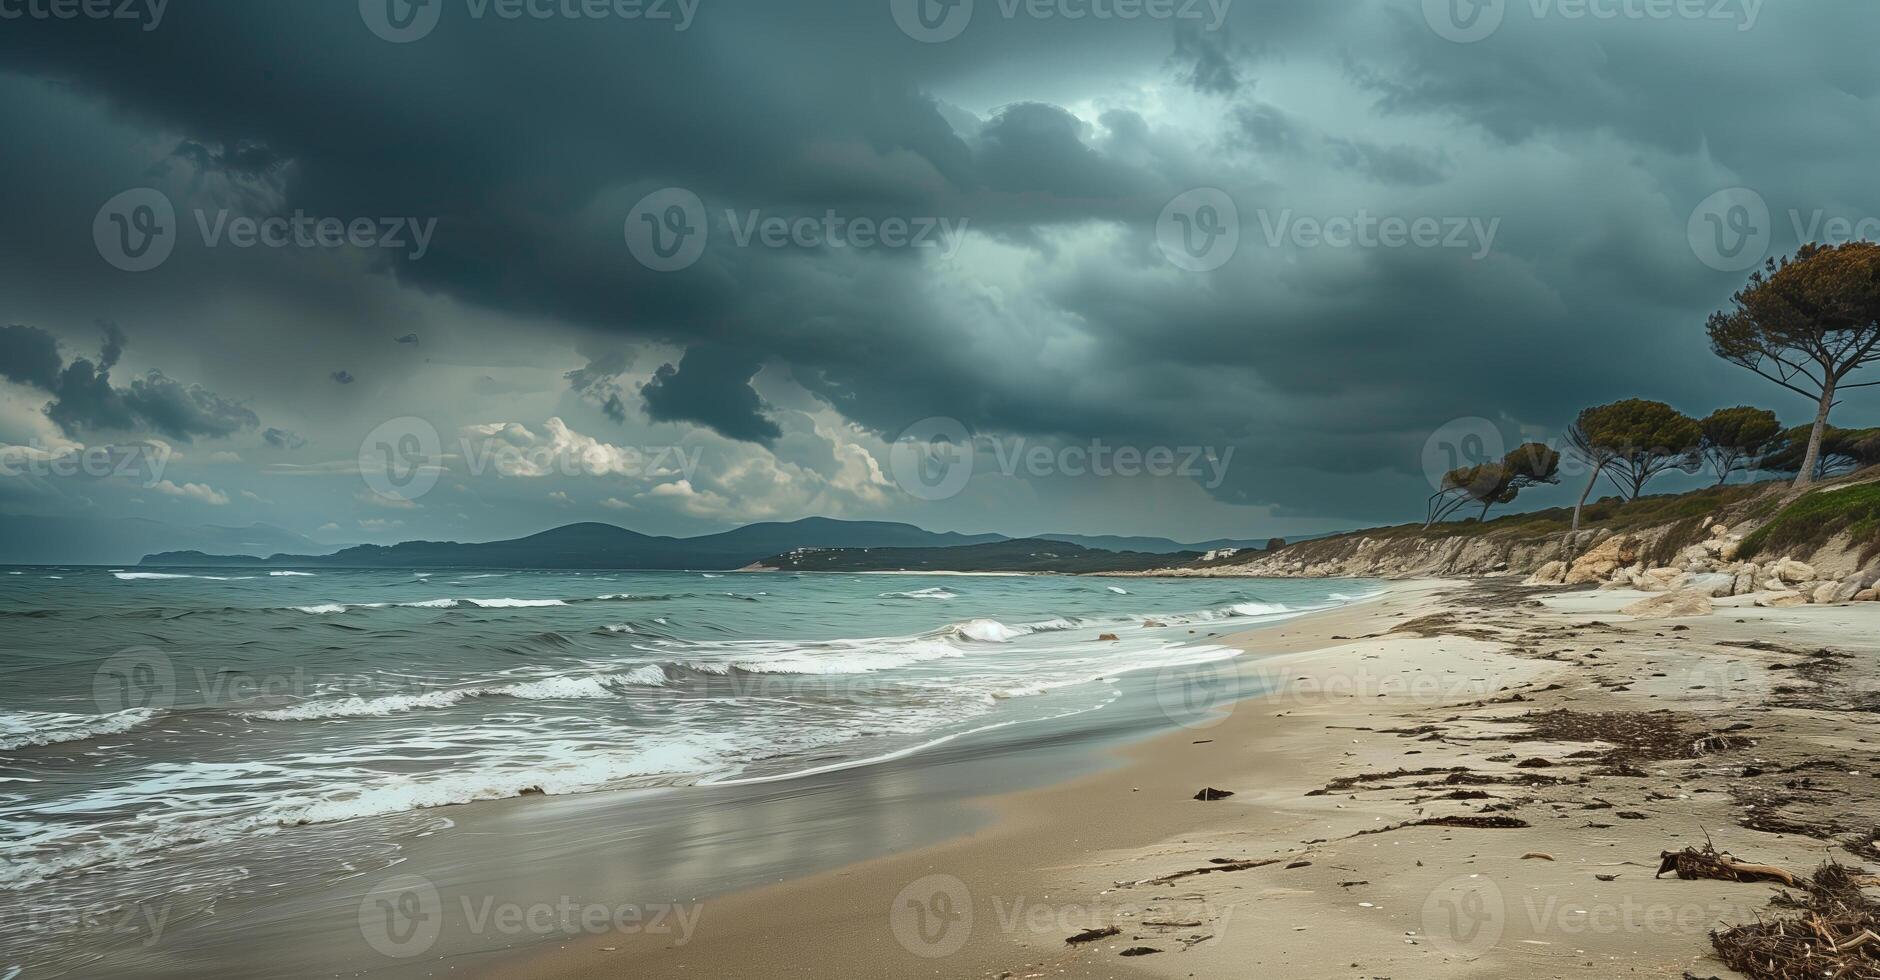 Wide-angle landscape photo featuring a seaside with crashing waves and dramatic sky